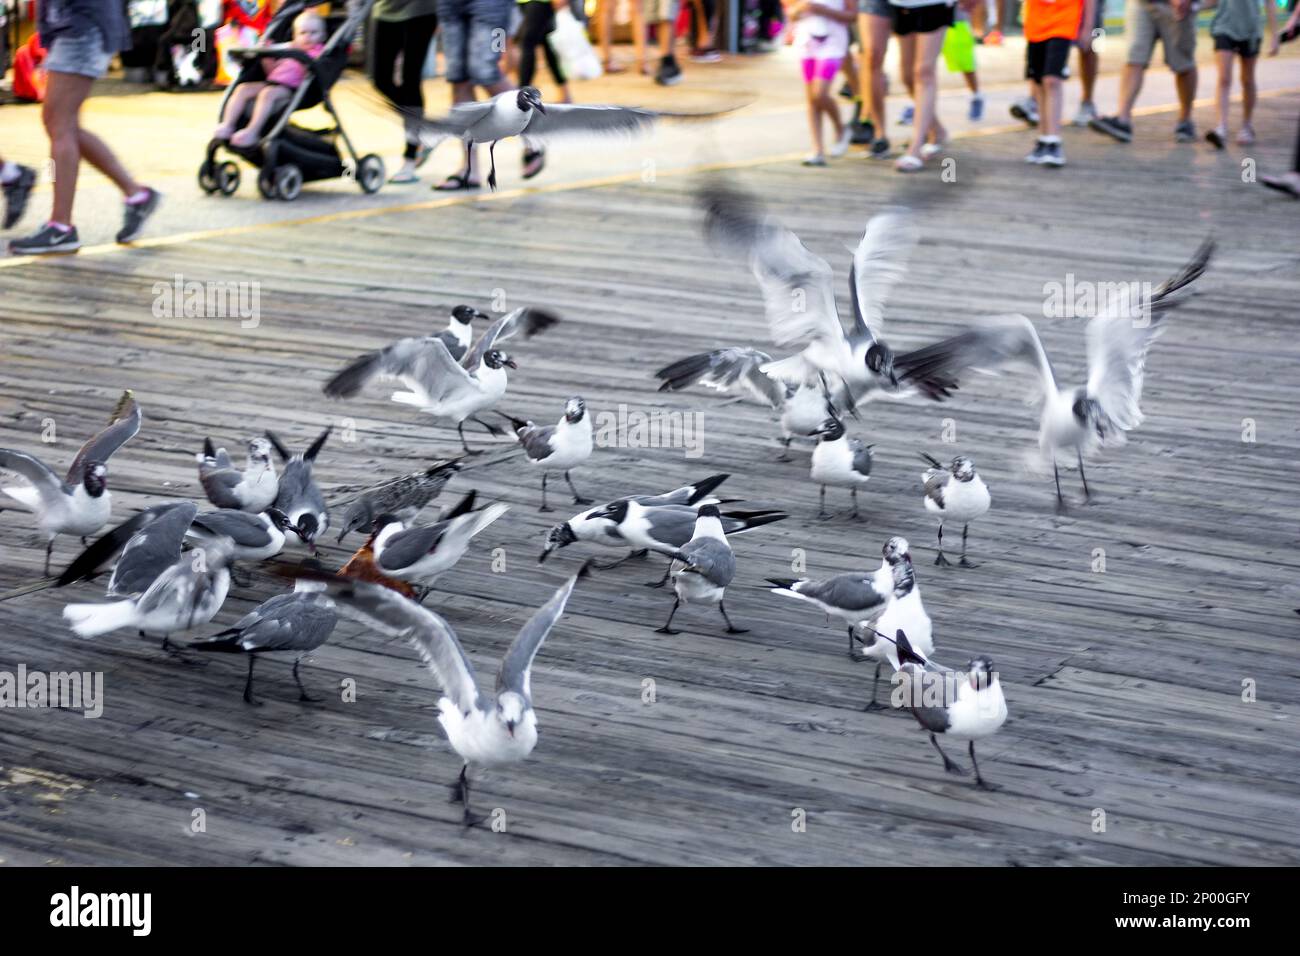 A flock of seagulls swoop in for a slice of pizza along the ocean boardwalk beach side. Stock Photo